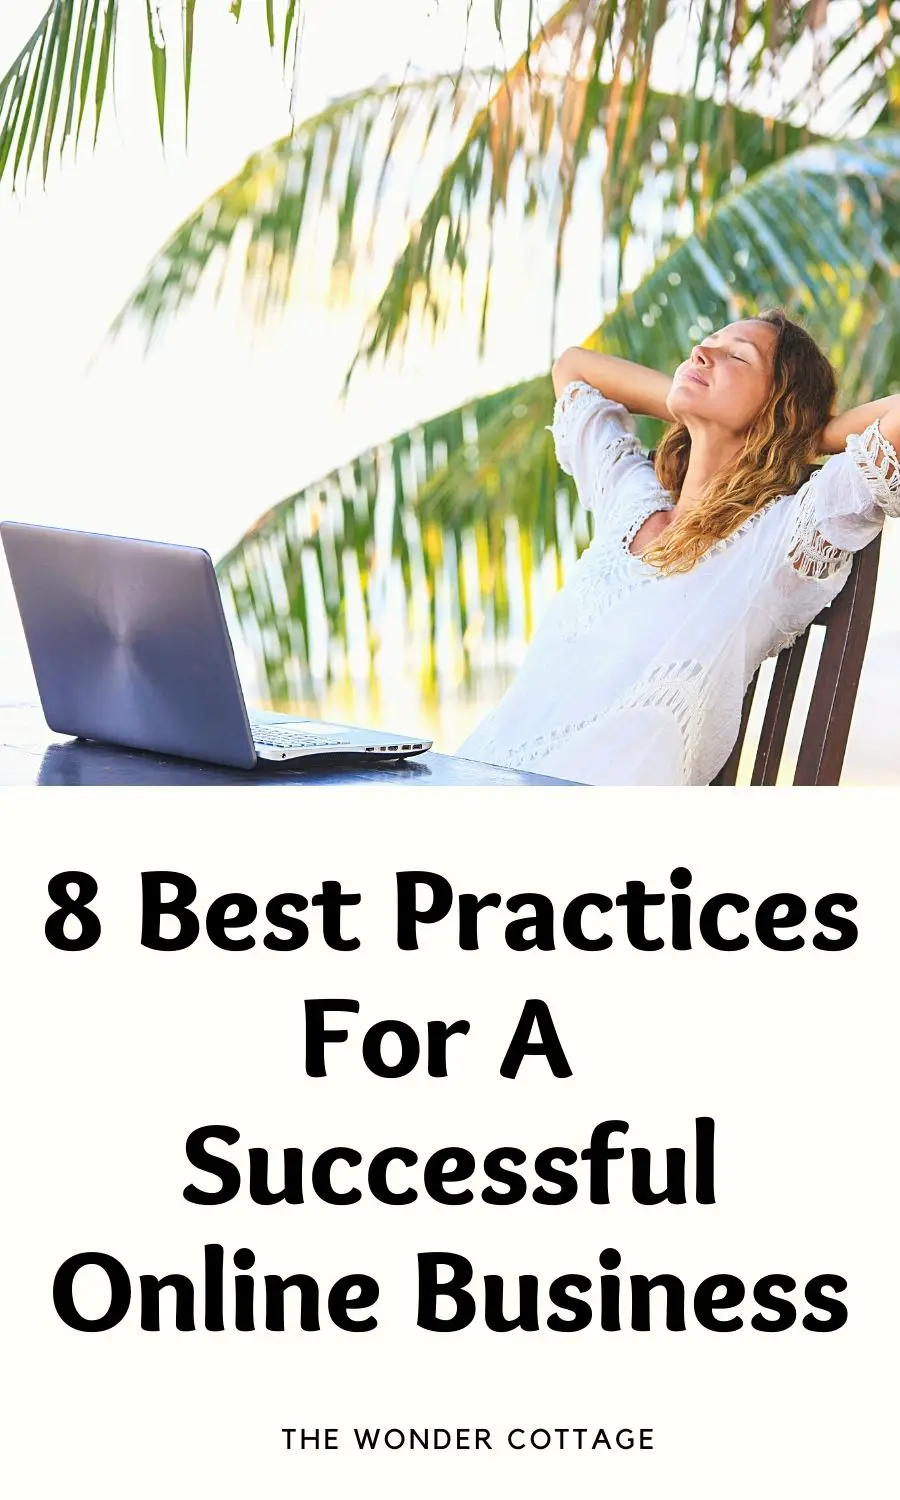 8 Best Practices For A Successful Online Business